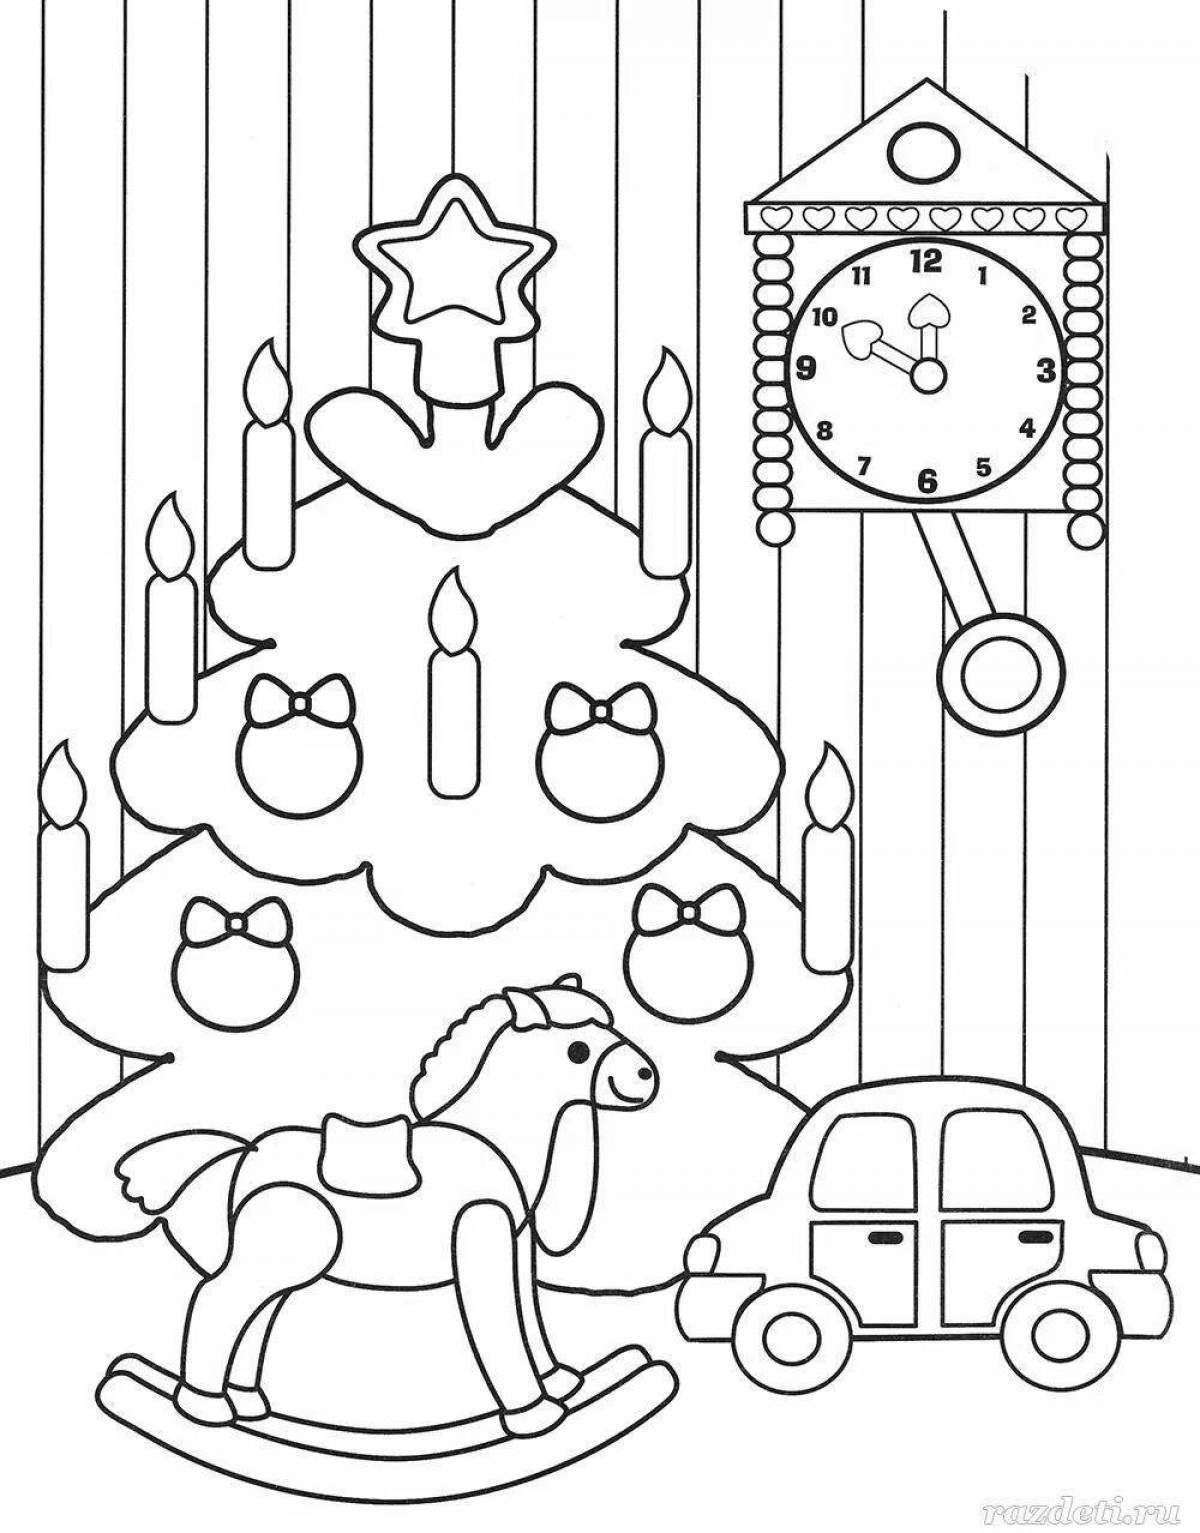 Generous Christmas coloring book for kids